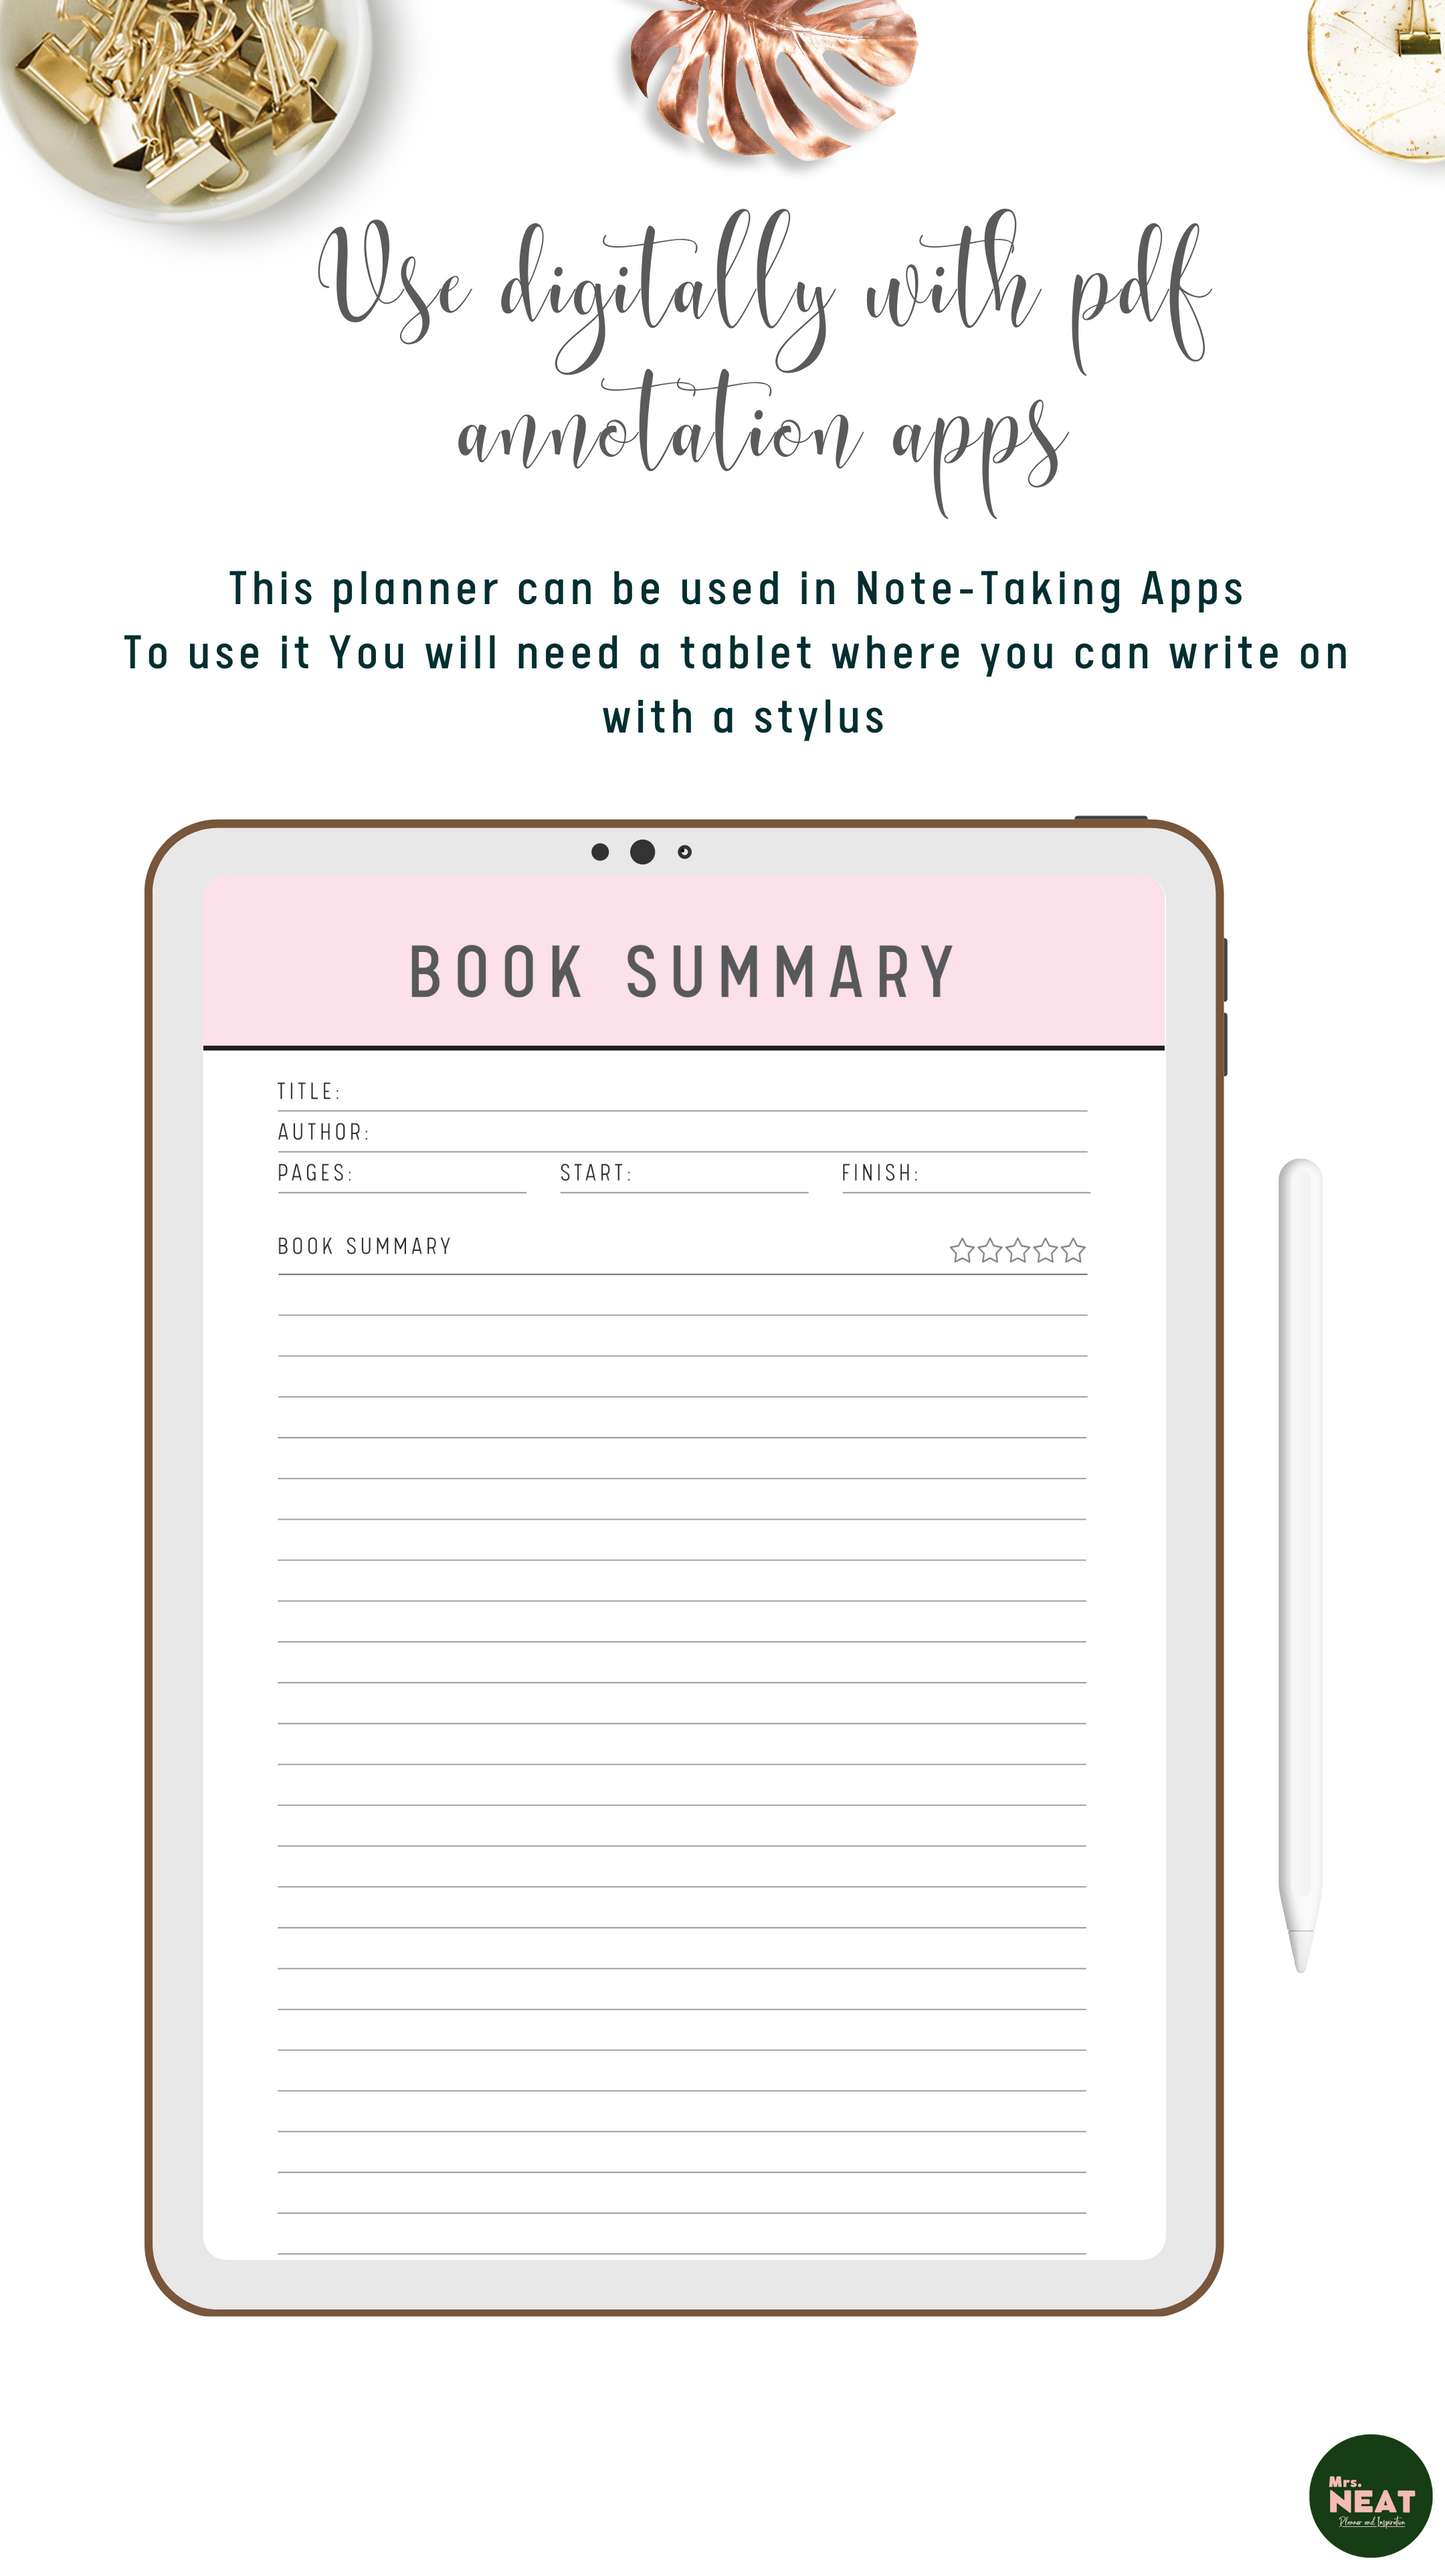 Beautiful and minimalist Book Summary Planner use digitally on tablet and stylus with PDF Annotation apps